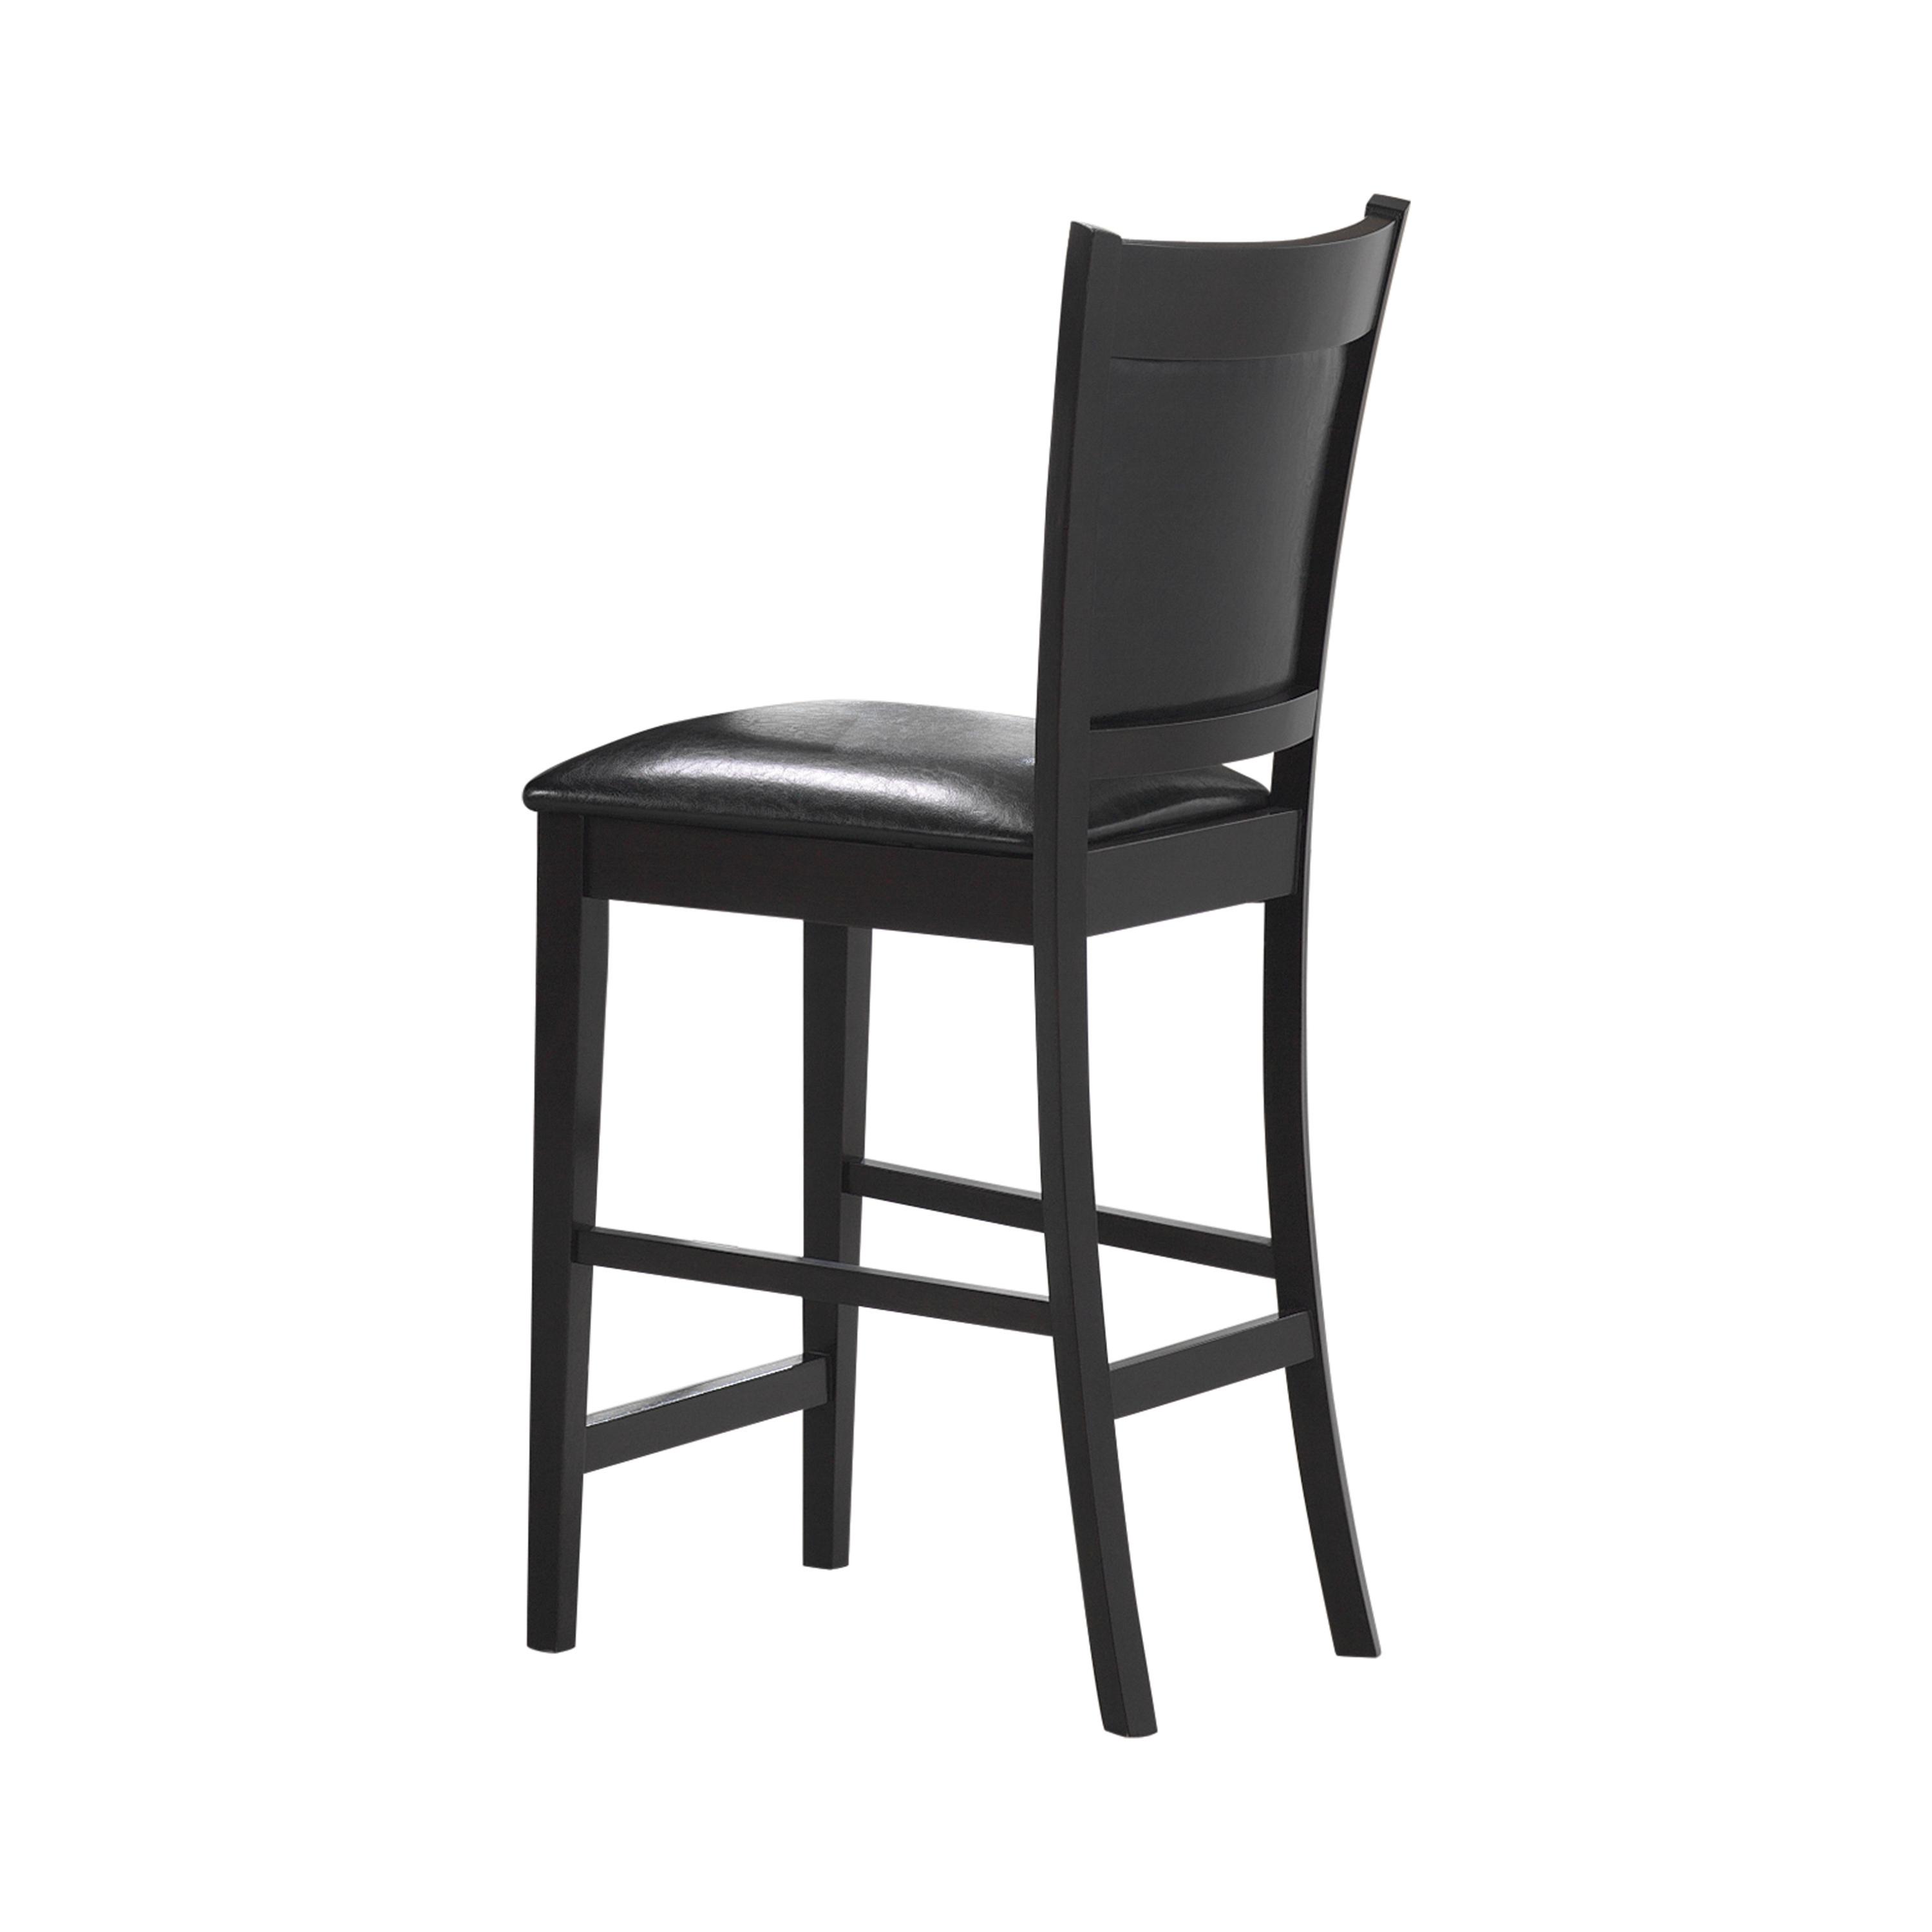 Transitional Counter Height Stool Set 100959 Jaden 100959 in Espresso Leatherette